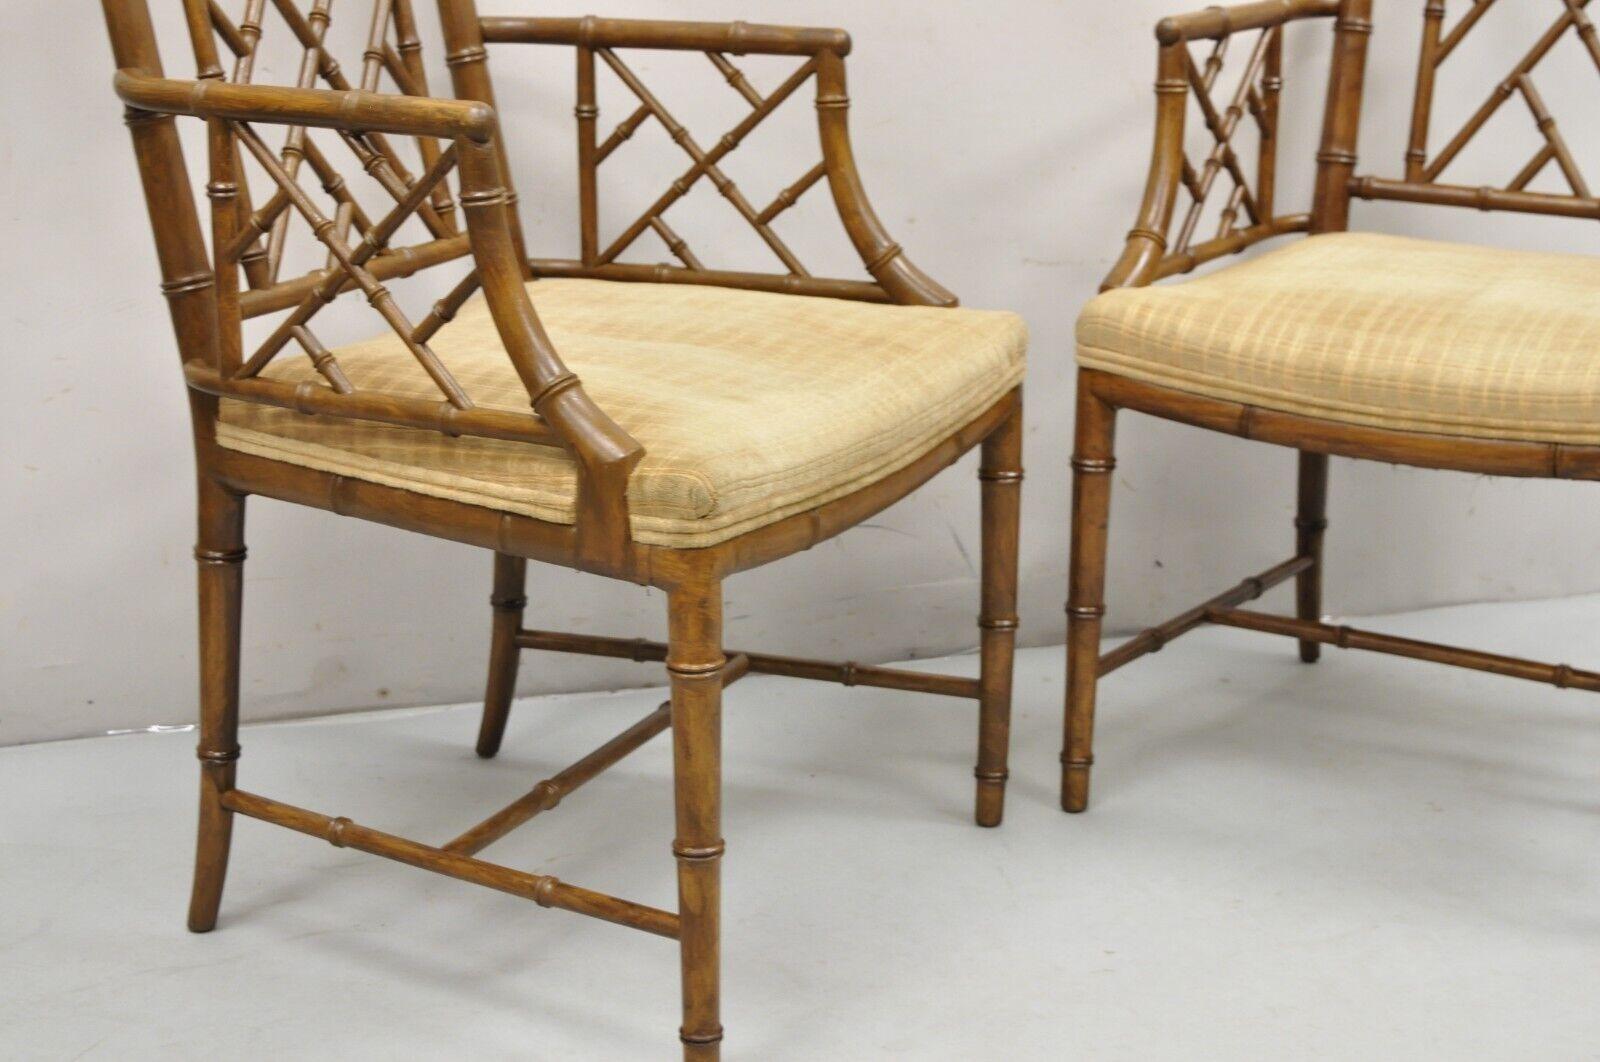 20th Century Hollywood Regency Faux Bamboo Fretwork Chinese Chippendale Arm Chairs - Pair For Sale